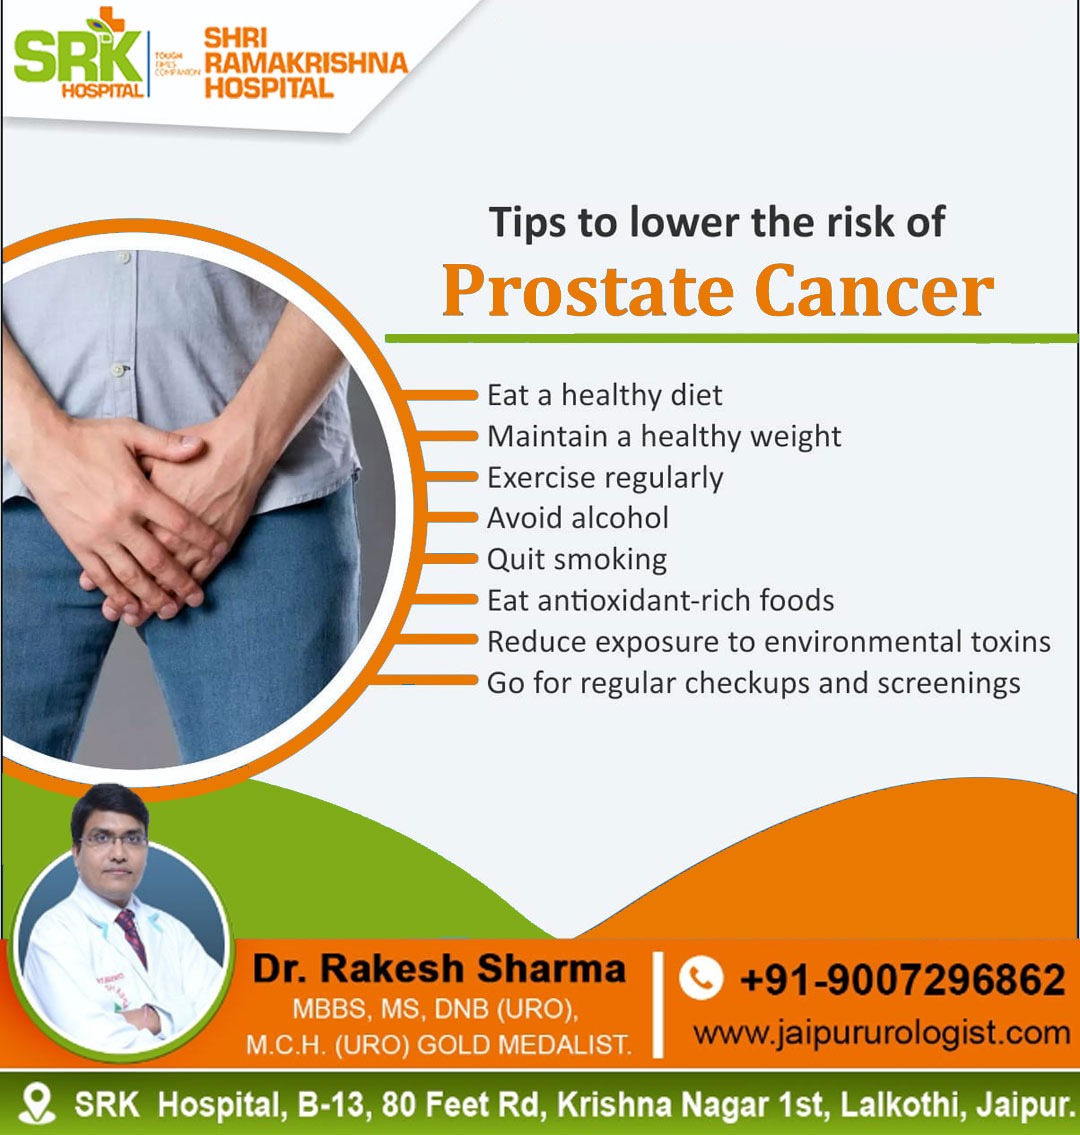 Book an appointment with Dr Rakesh Sharma The appointment available on call at: 09007296862. or website jaipururologist.com #DrRakeshSharma #Urologist #UrologistInJaipur #KidneyStone #KidneyTransplantation #slipdisctreatment #kidneytransplant #kidney #laparoscopicsurgery